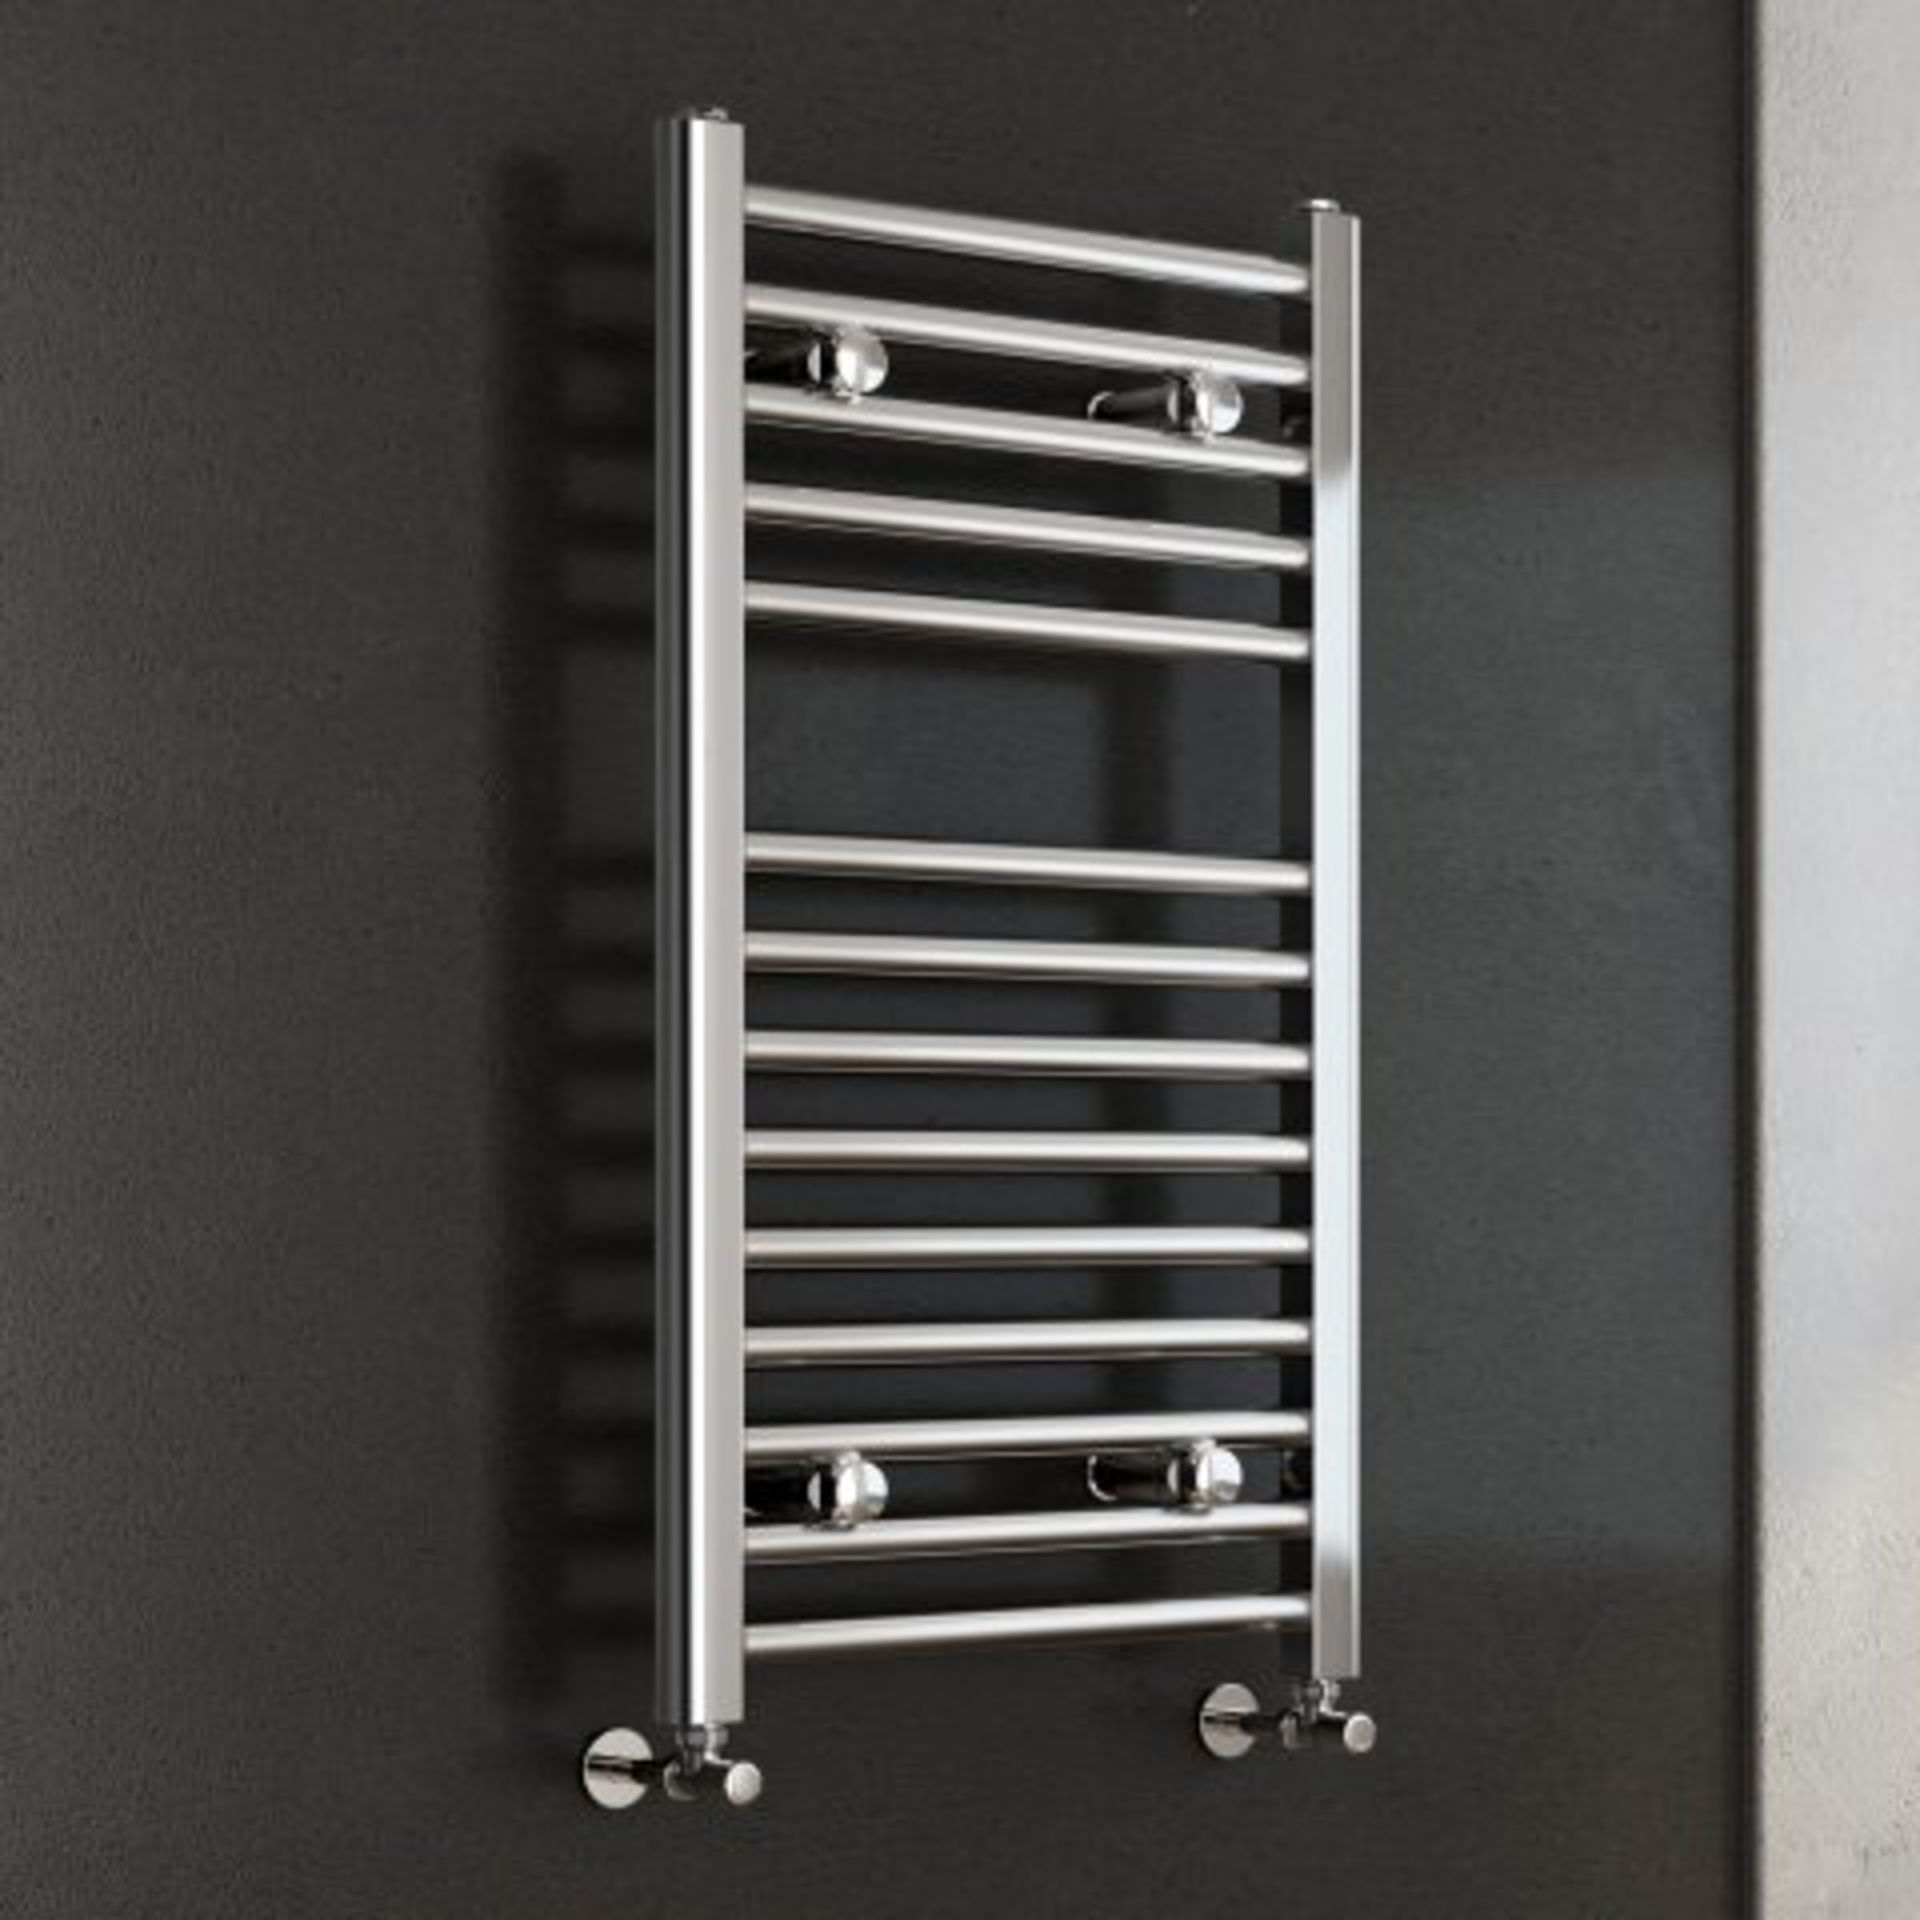 (H82) : 800x450mm - 25mm Tubes - Chrome Heated Straight Rail Ladder Towel Radiators. Benefit from